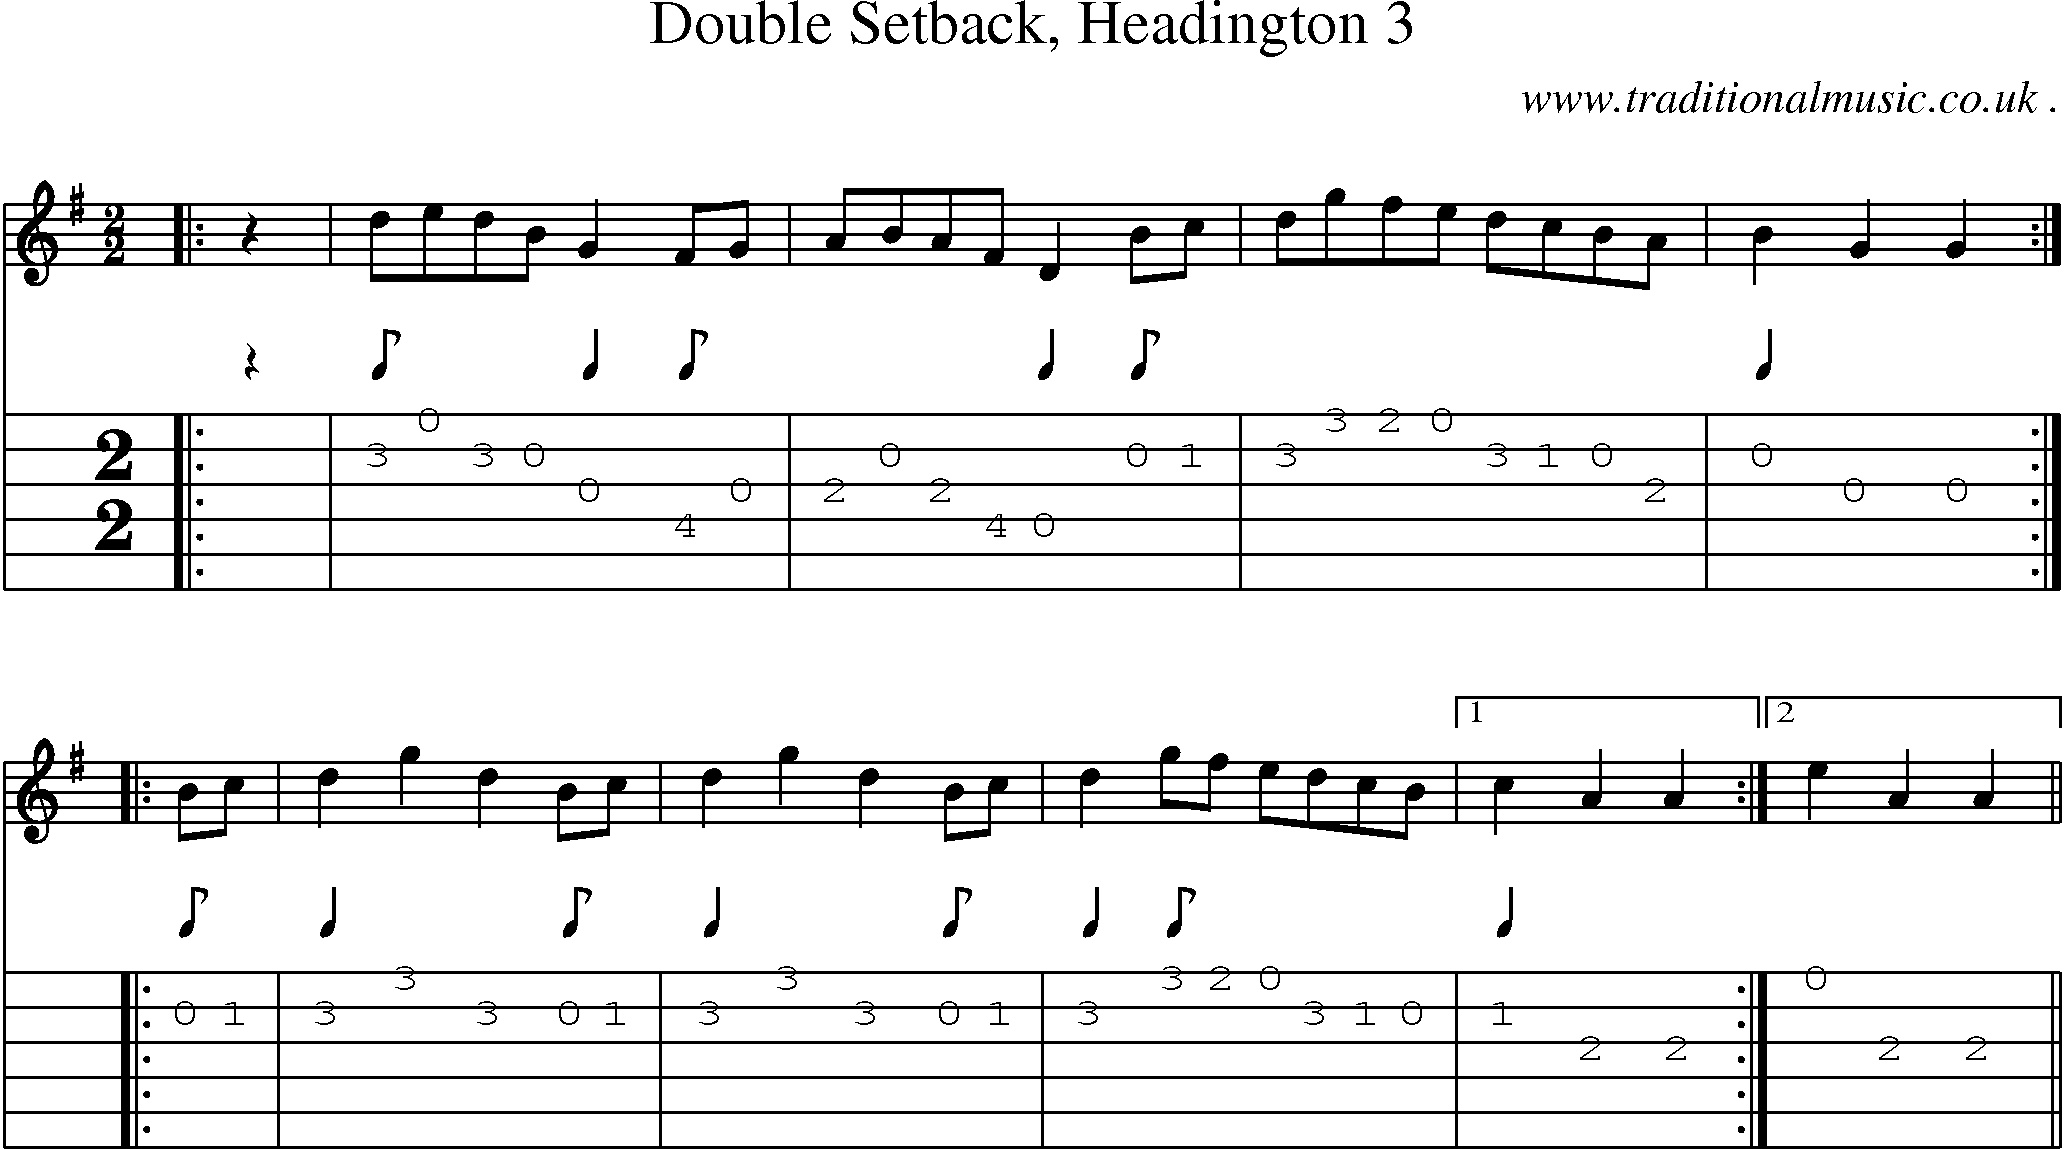 Sheet-Music and Guitar Tabs for Double Setback Headington 3